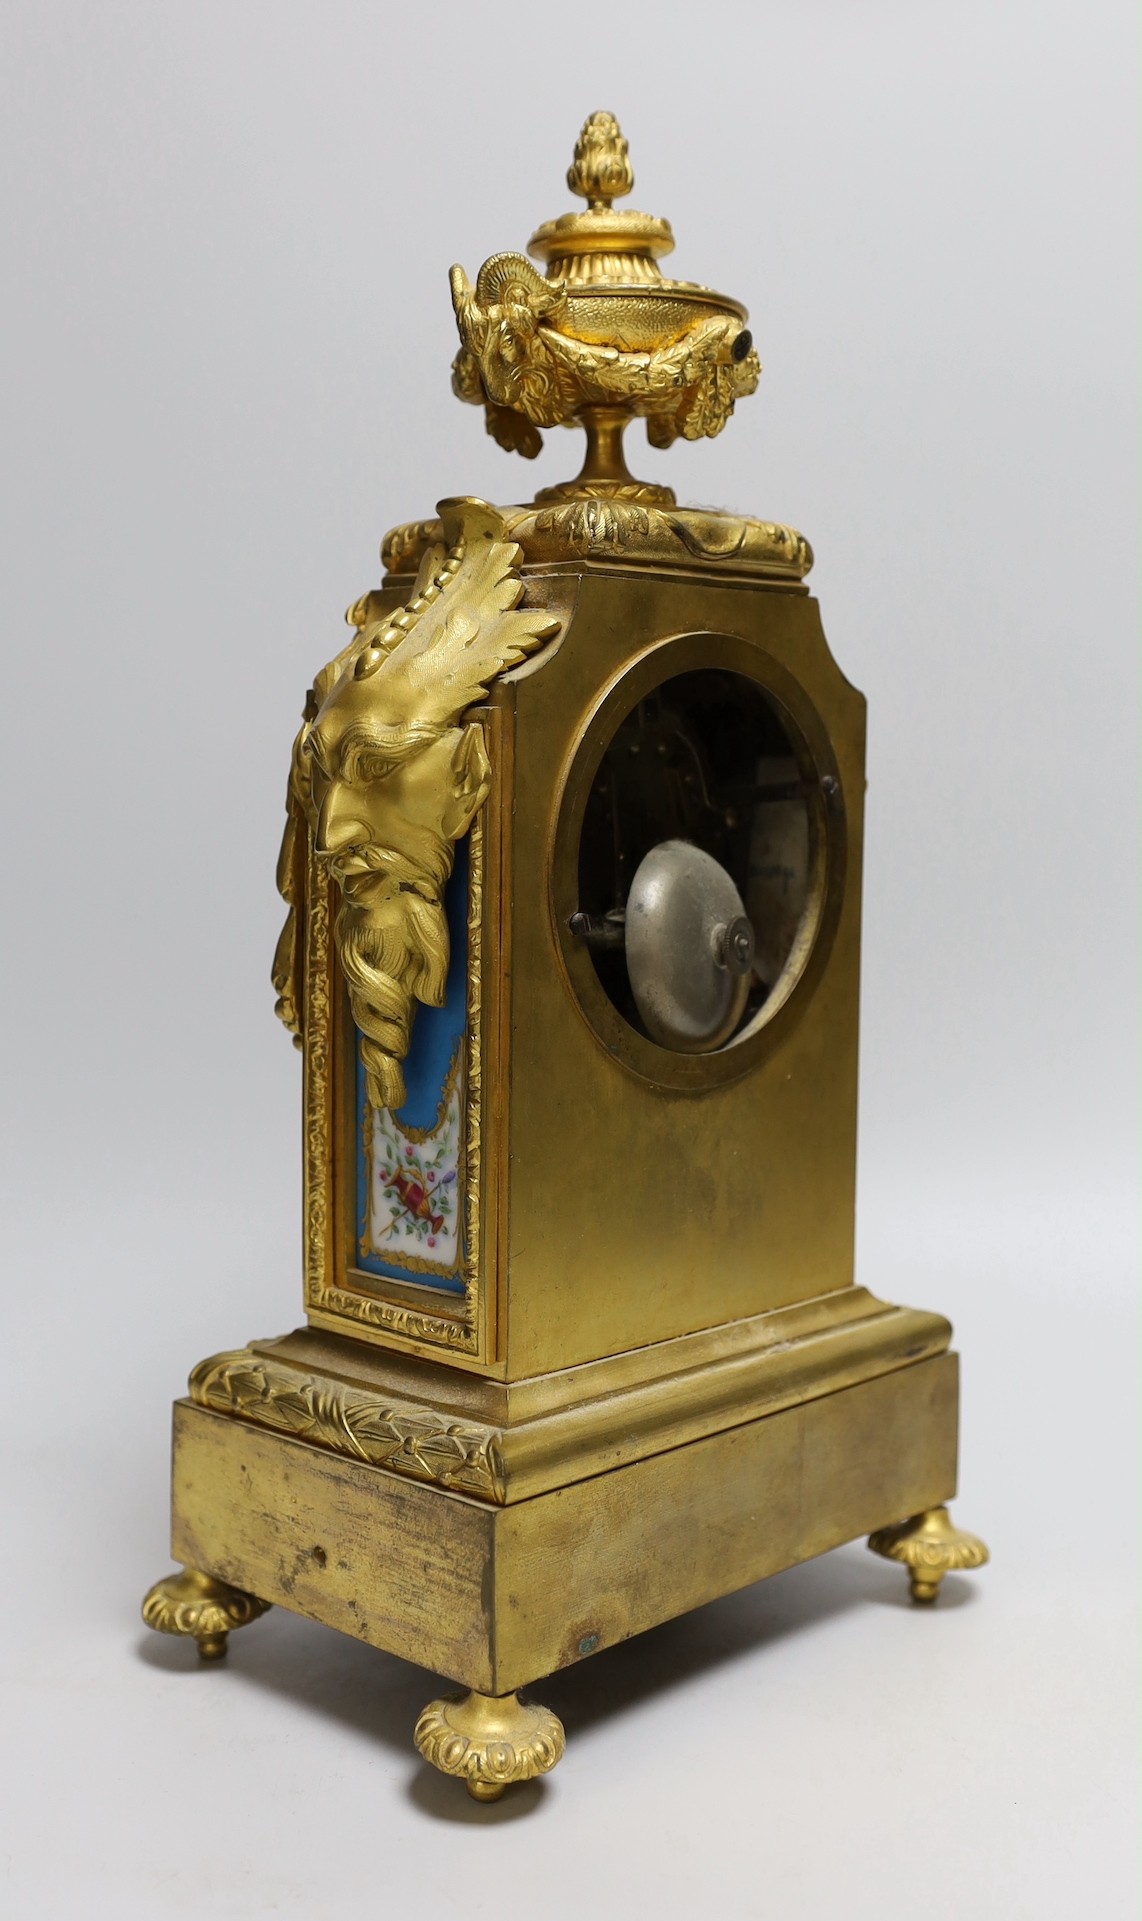 A 19th century French ormolu and Sevres style porcelain mounted mantel clock, 38cms high